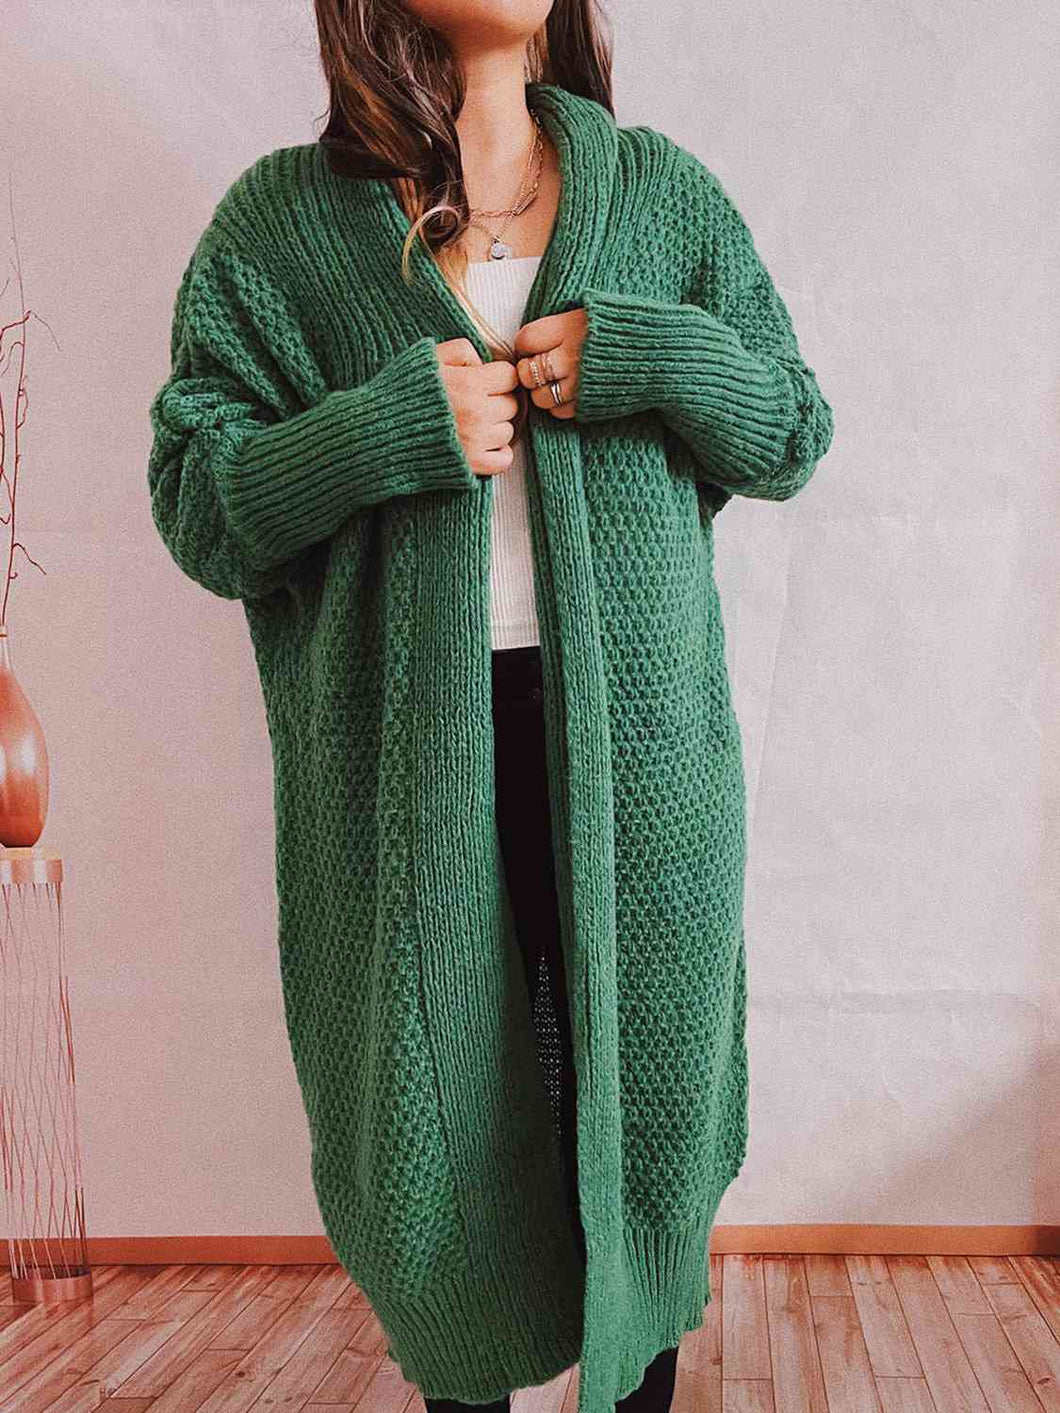 Long Lived Weekends Cozy Cardigan